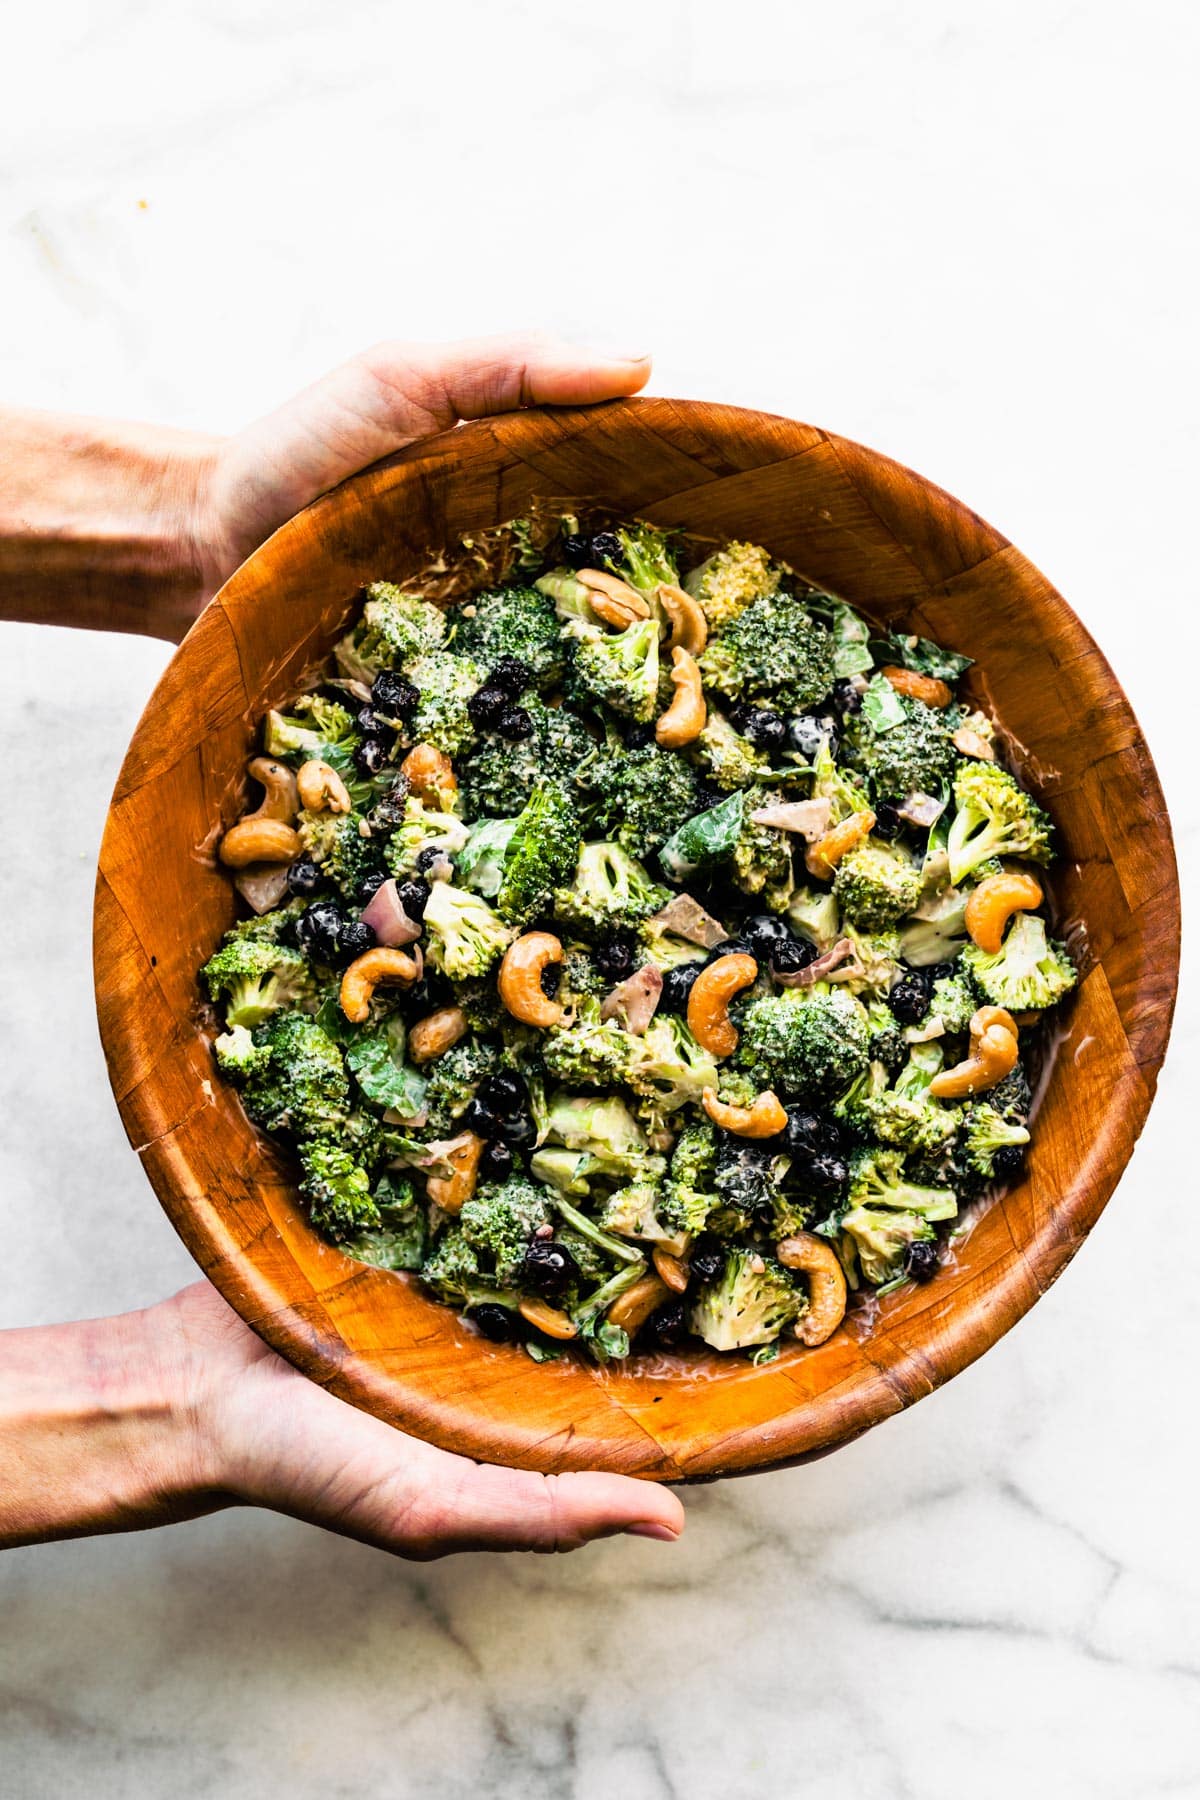 Two hands holding a wooden bowl filled with healthy broccoli salad garnished with cashews.